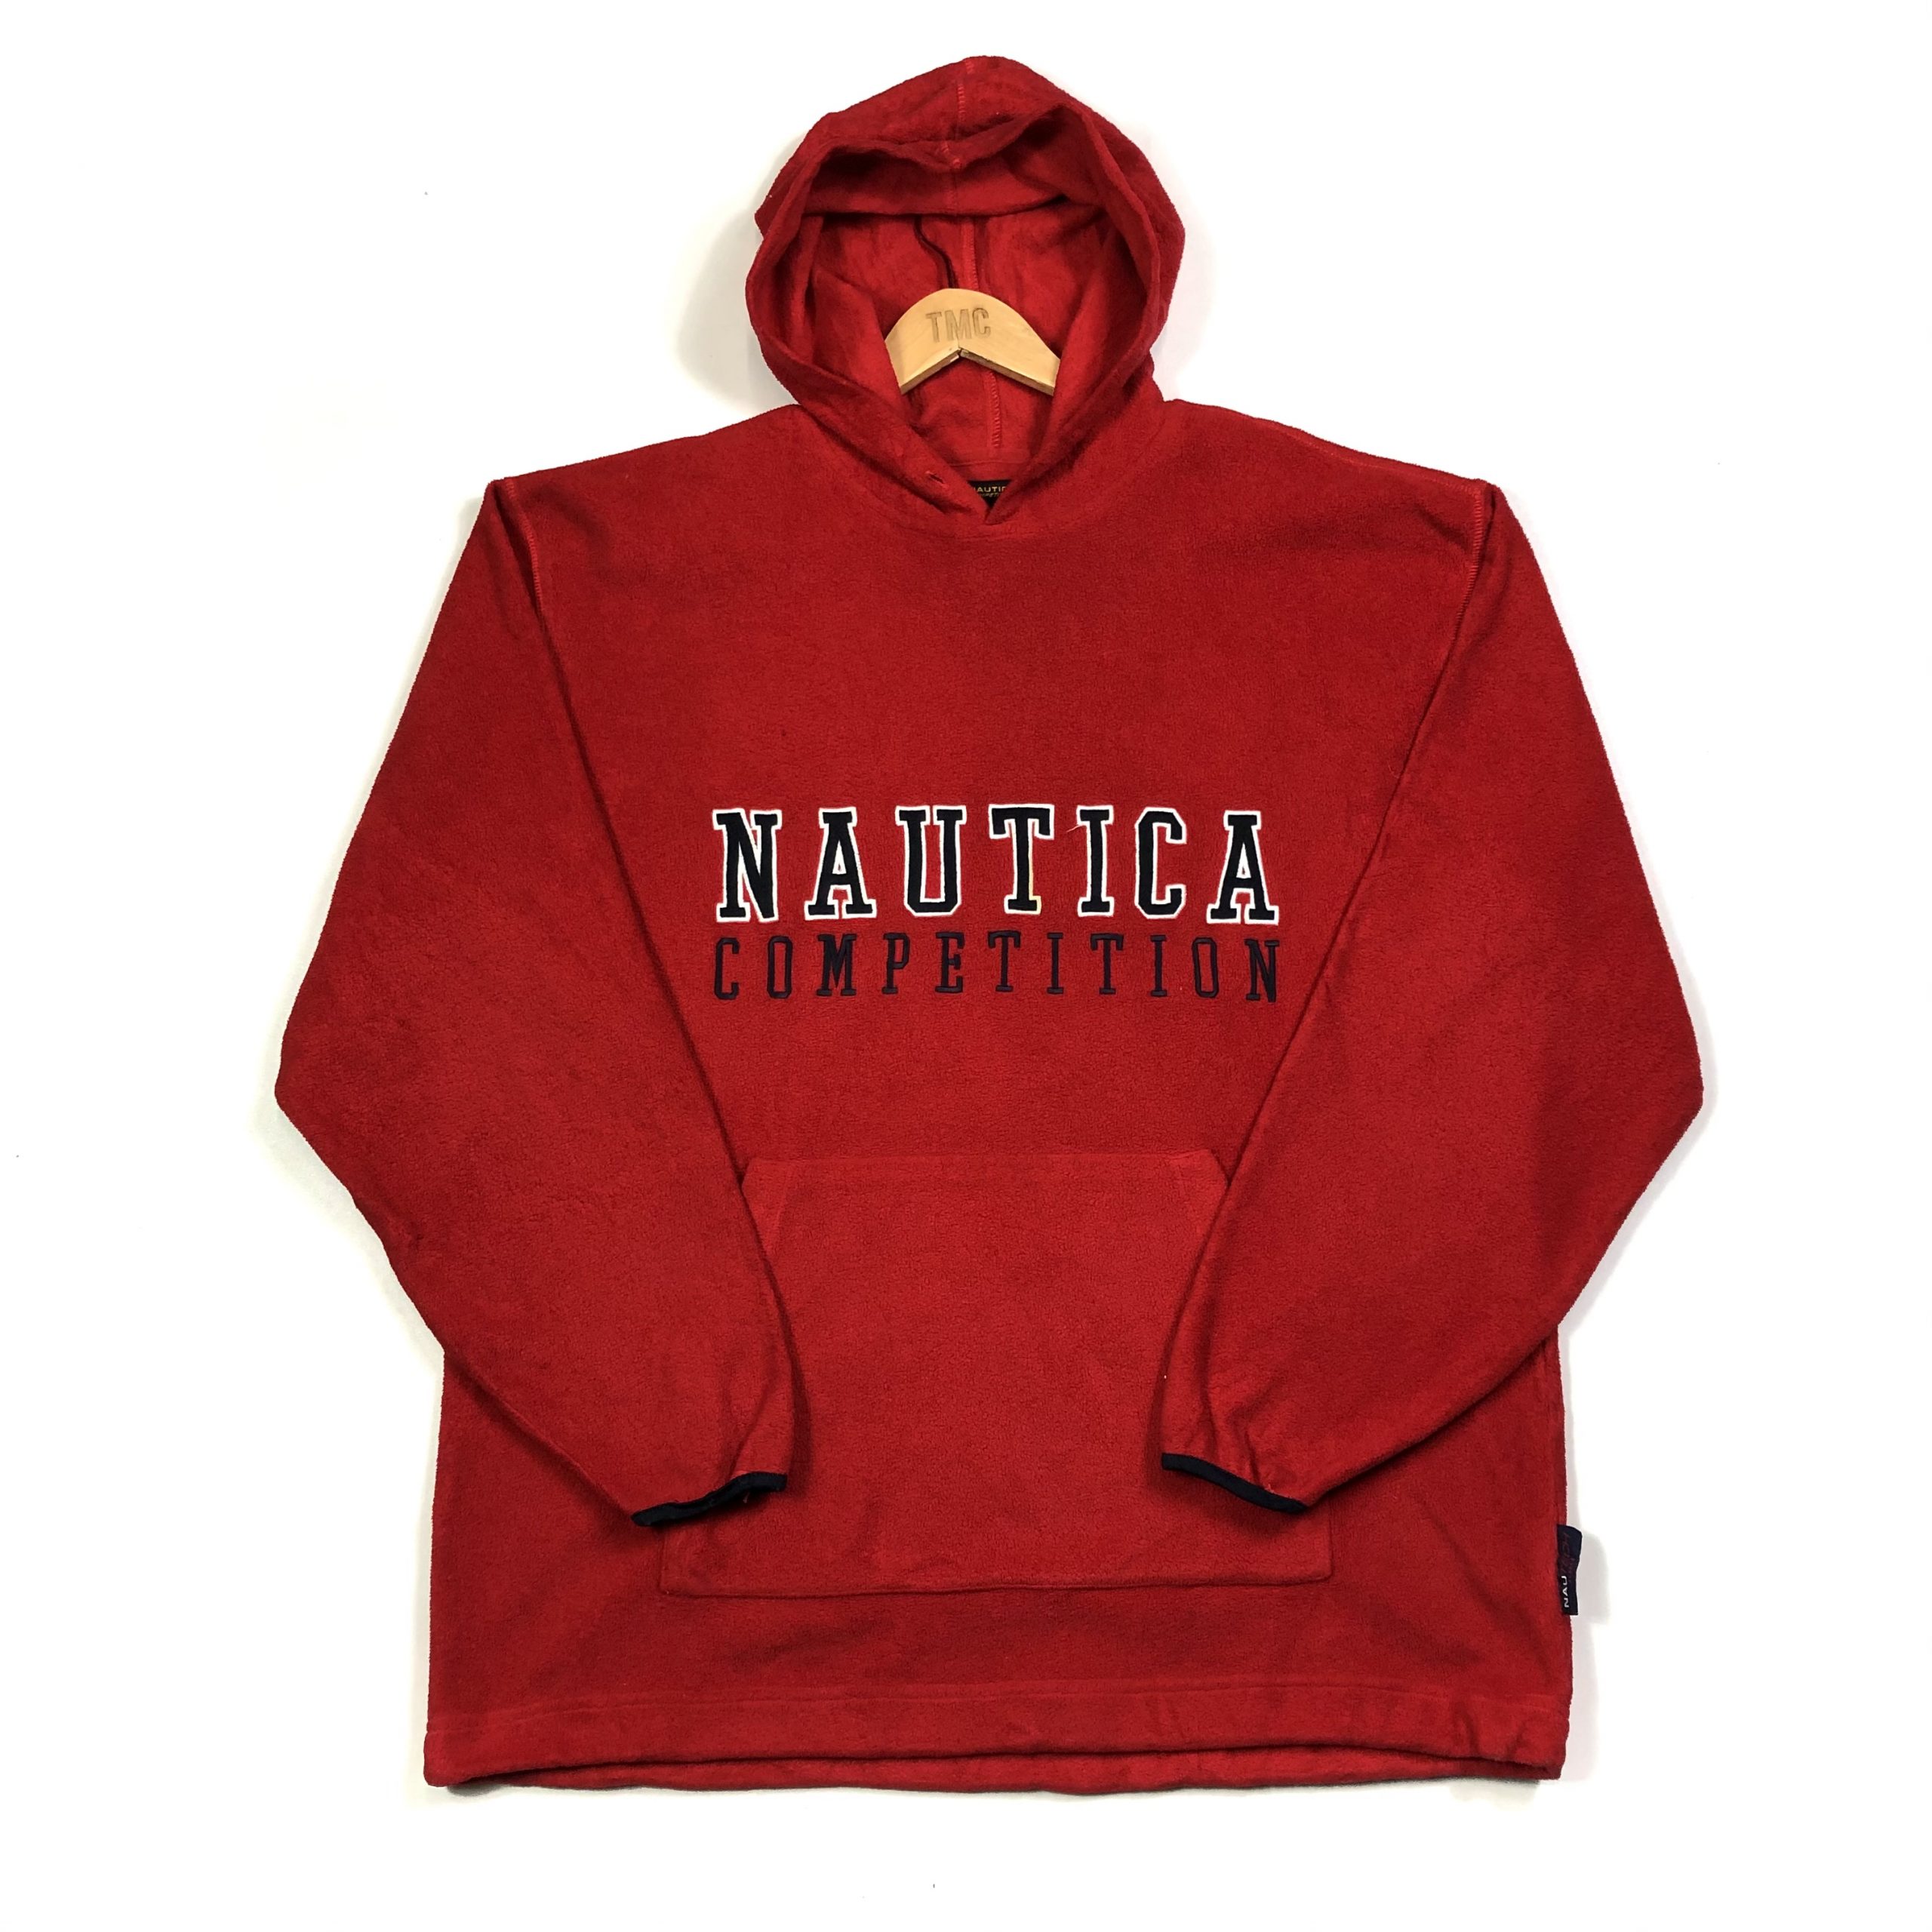 Nautica Spell Out Fleece Hoodie - Red - XL - TMC Vintage - Vintage Clothing